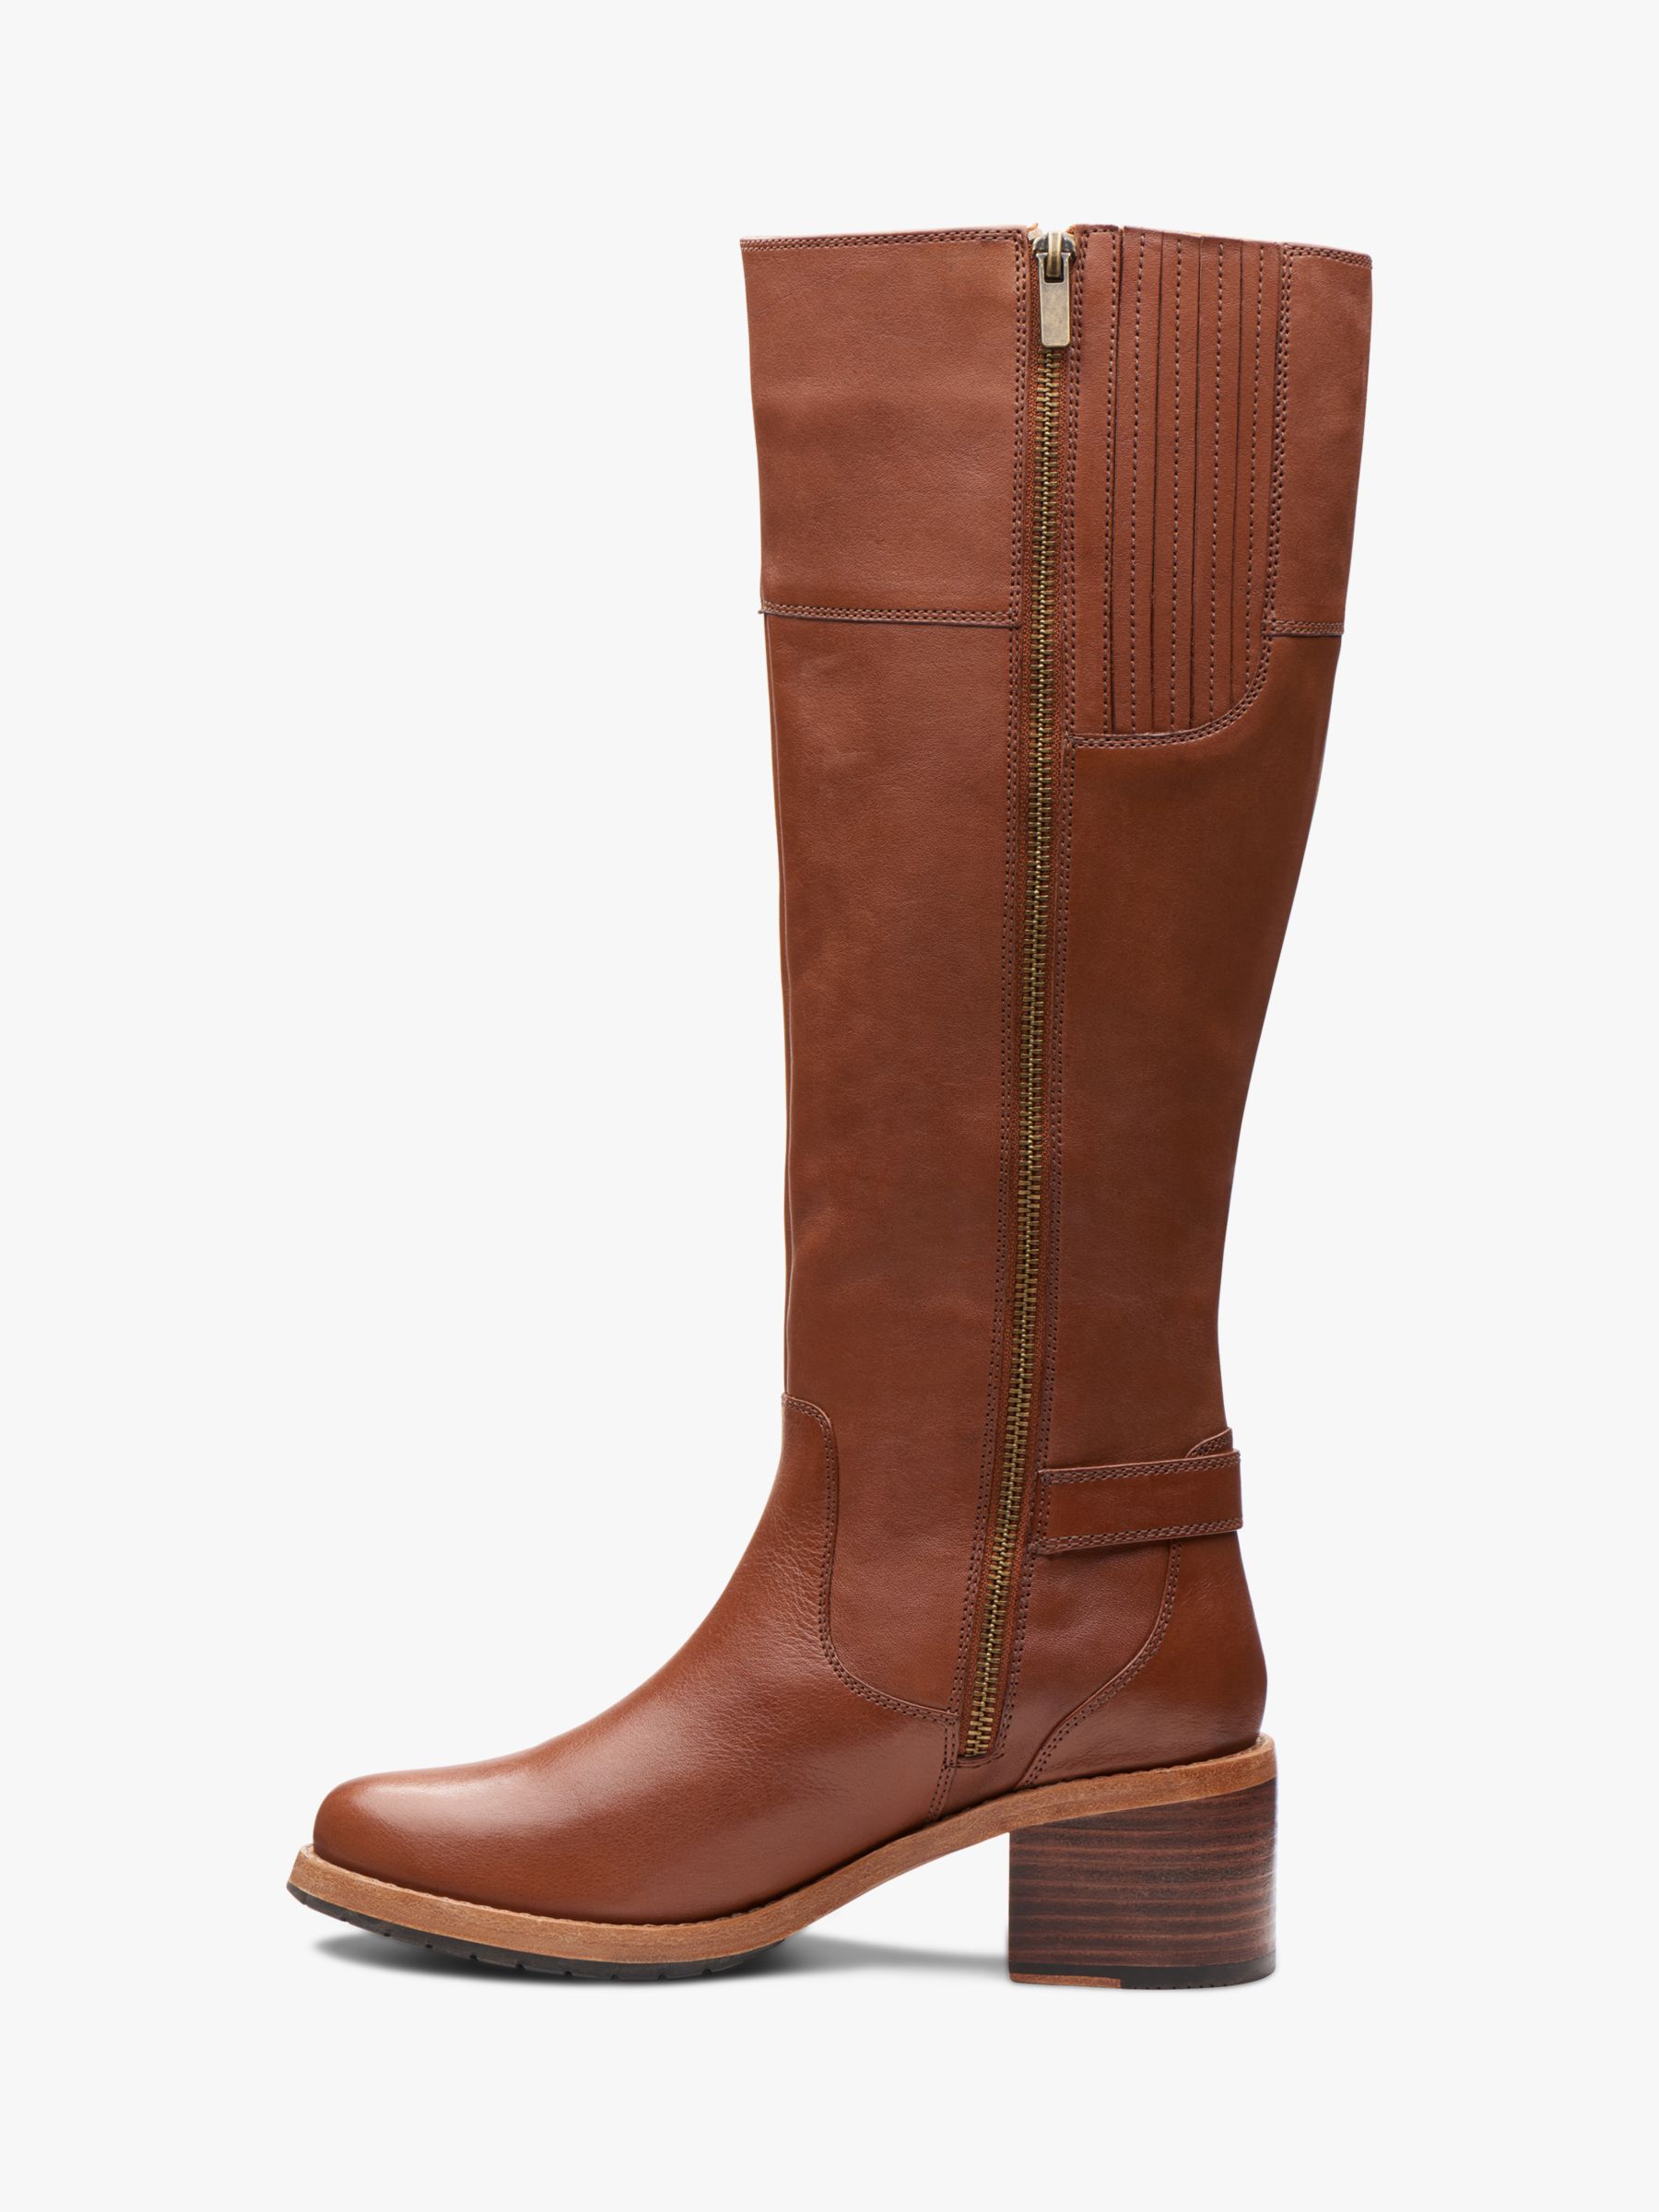 Clarks Clarkdale Sona Leather Knee High 